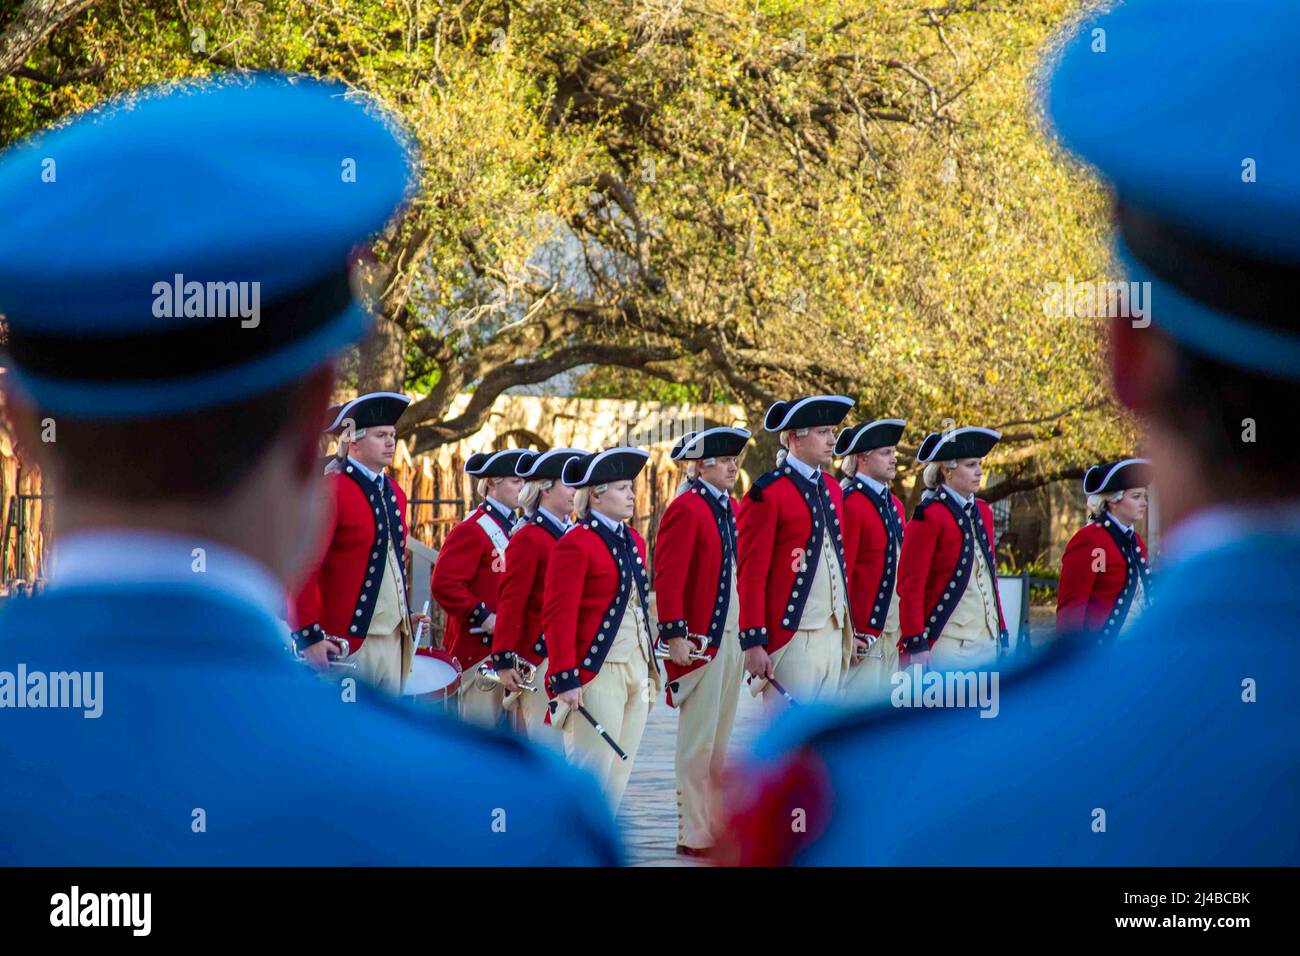 San Antonio, Texas, USA. 2nd Apr, 2022. Members of the U.S. Fife and Drum Corps perform at the Investiture of King Antonio ceremony for Fiesta 2022 at the Alamo Plaza in downtown San Antonio, April 2, 2022. King Antonio is a Fiesta dignitary selected from the ranks of the Texas Cavaliers, an organization of 600 businesses, civic and community leaders, who volunteer their time and talents in support of San Antonio area charities. Credit: U.S. Army/ZUMA Press Wire Service/ZUMAPRESS.com/Alamy Live News Stock Photo